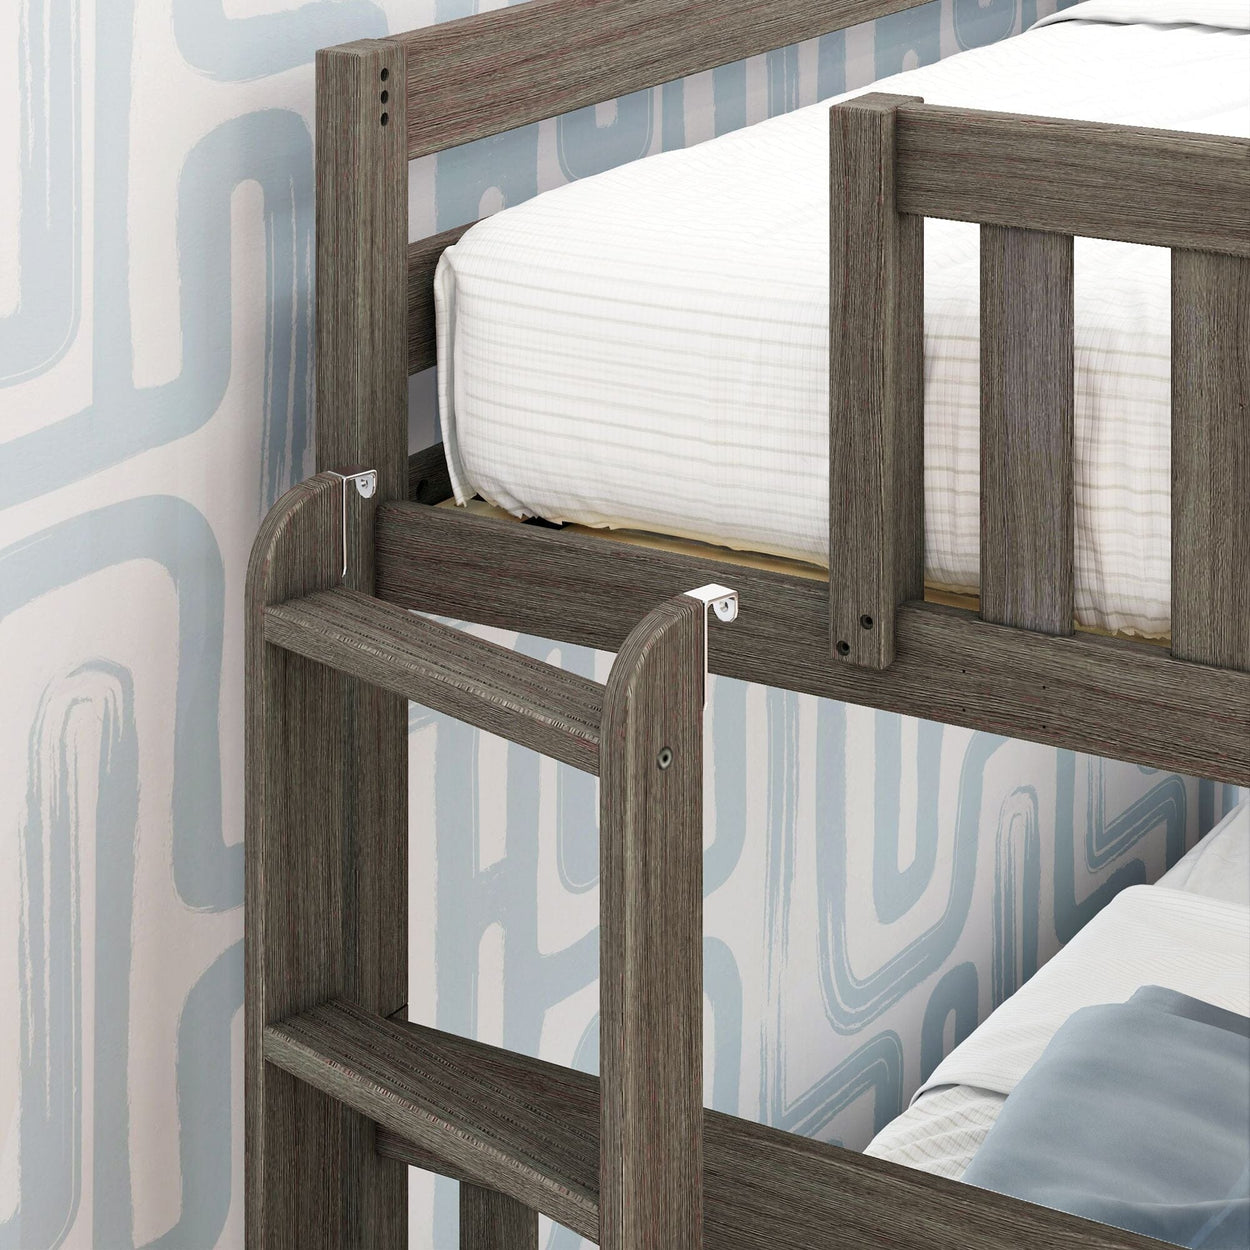 185305-151 : Bunk Beds Twin over Twin Bunk Bed with Ladder on End, Clay